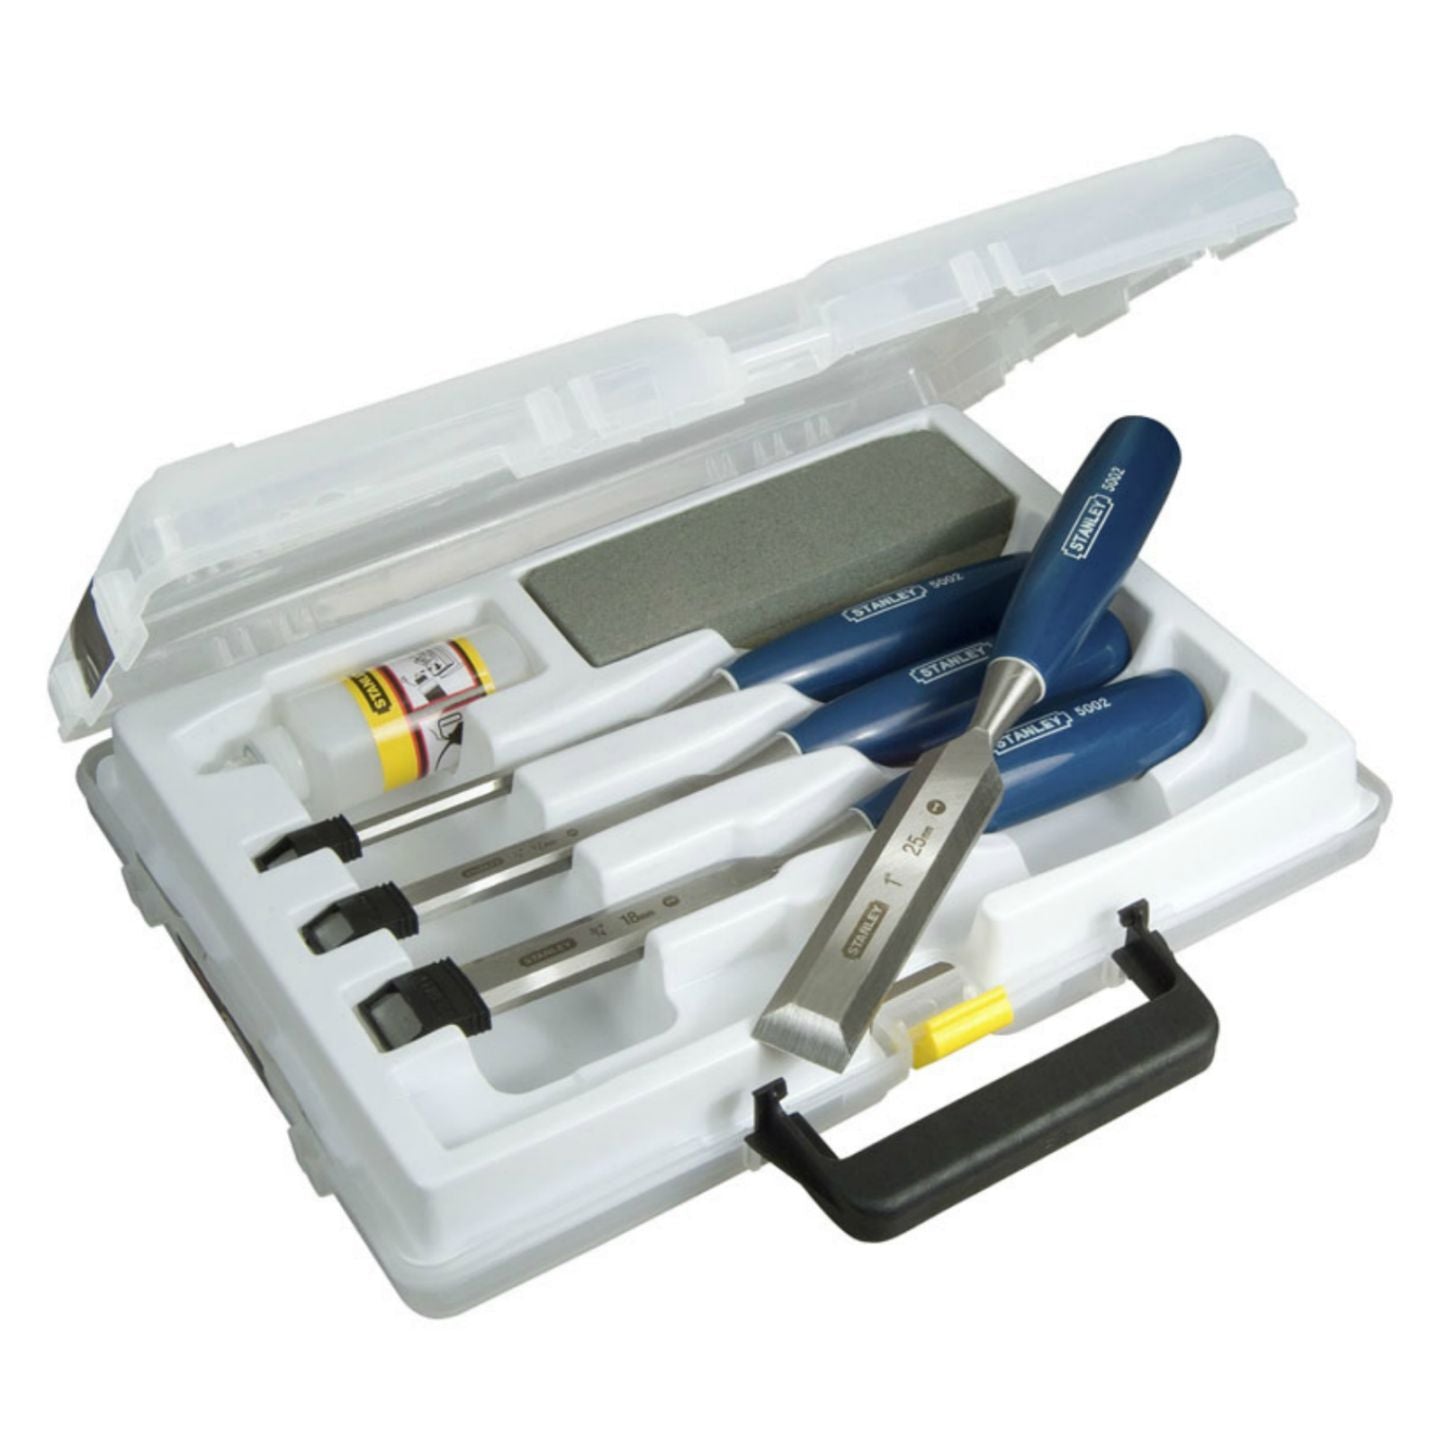 4Pce Woodworking Chisel Set in Plastic Case 0-16-130 5002 by Stanley